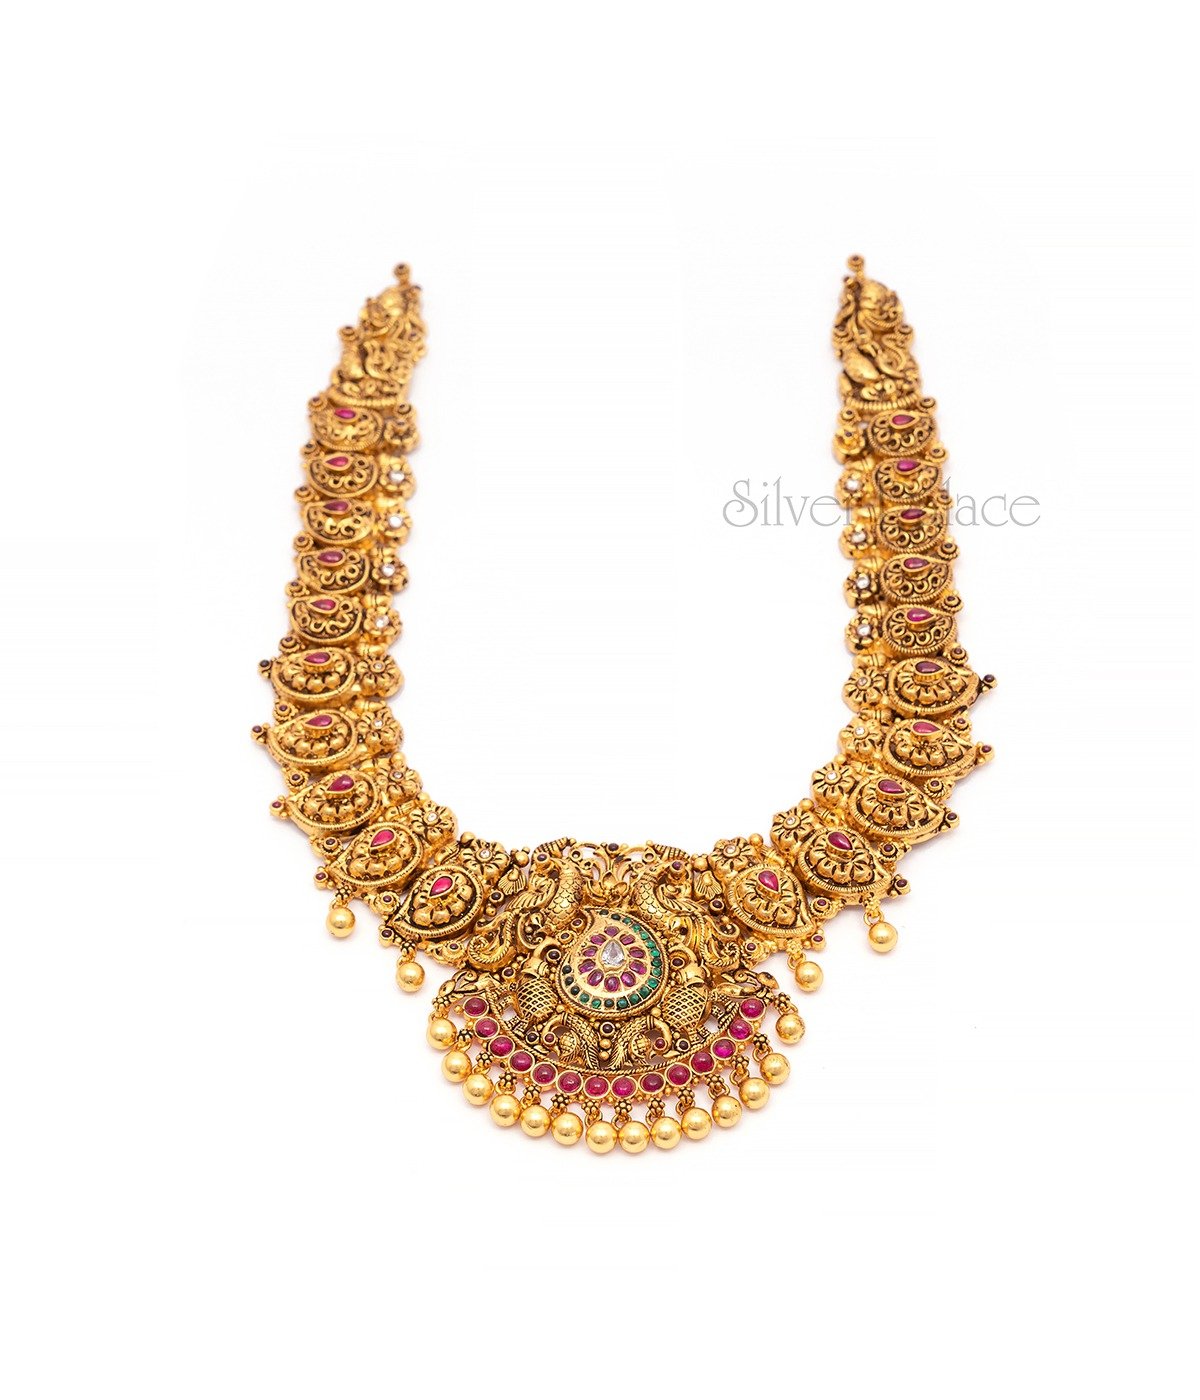 GOLD PLATED PEACOCK DESIGN LONG NECKLACE WITH GOLD BEADS